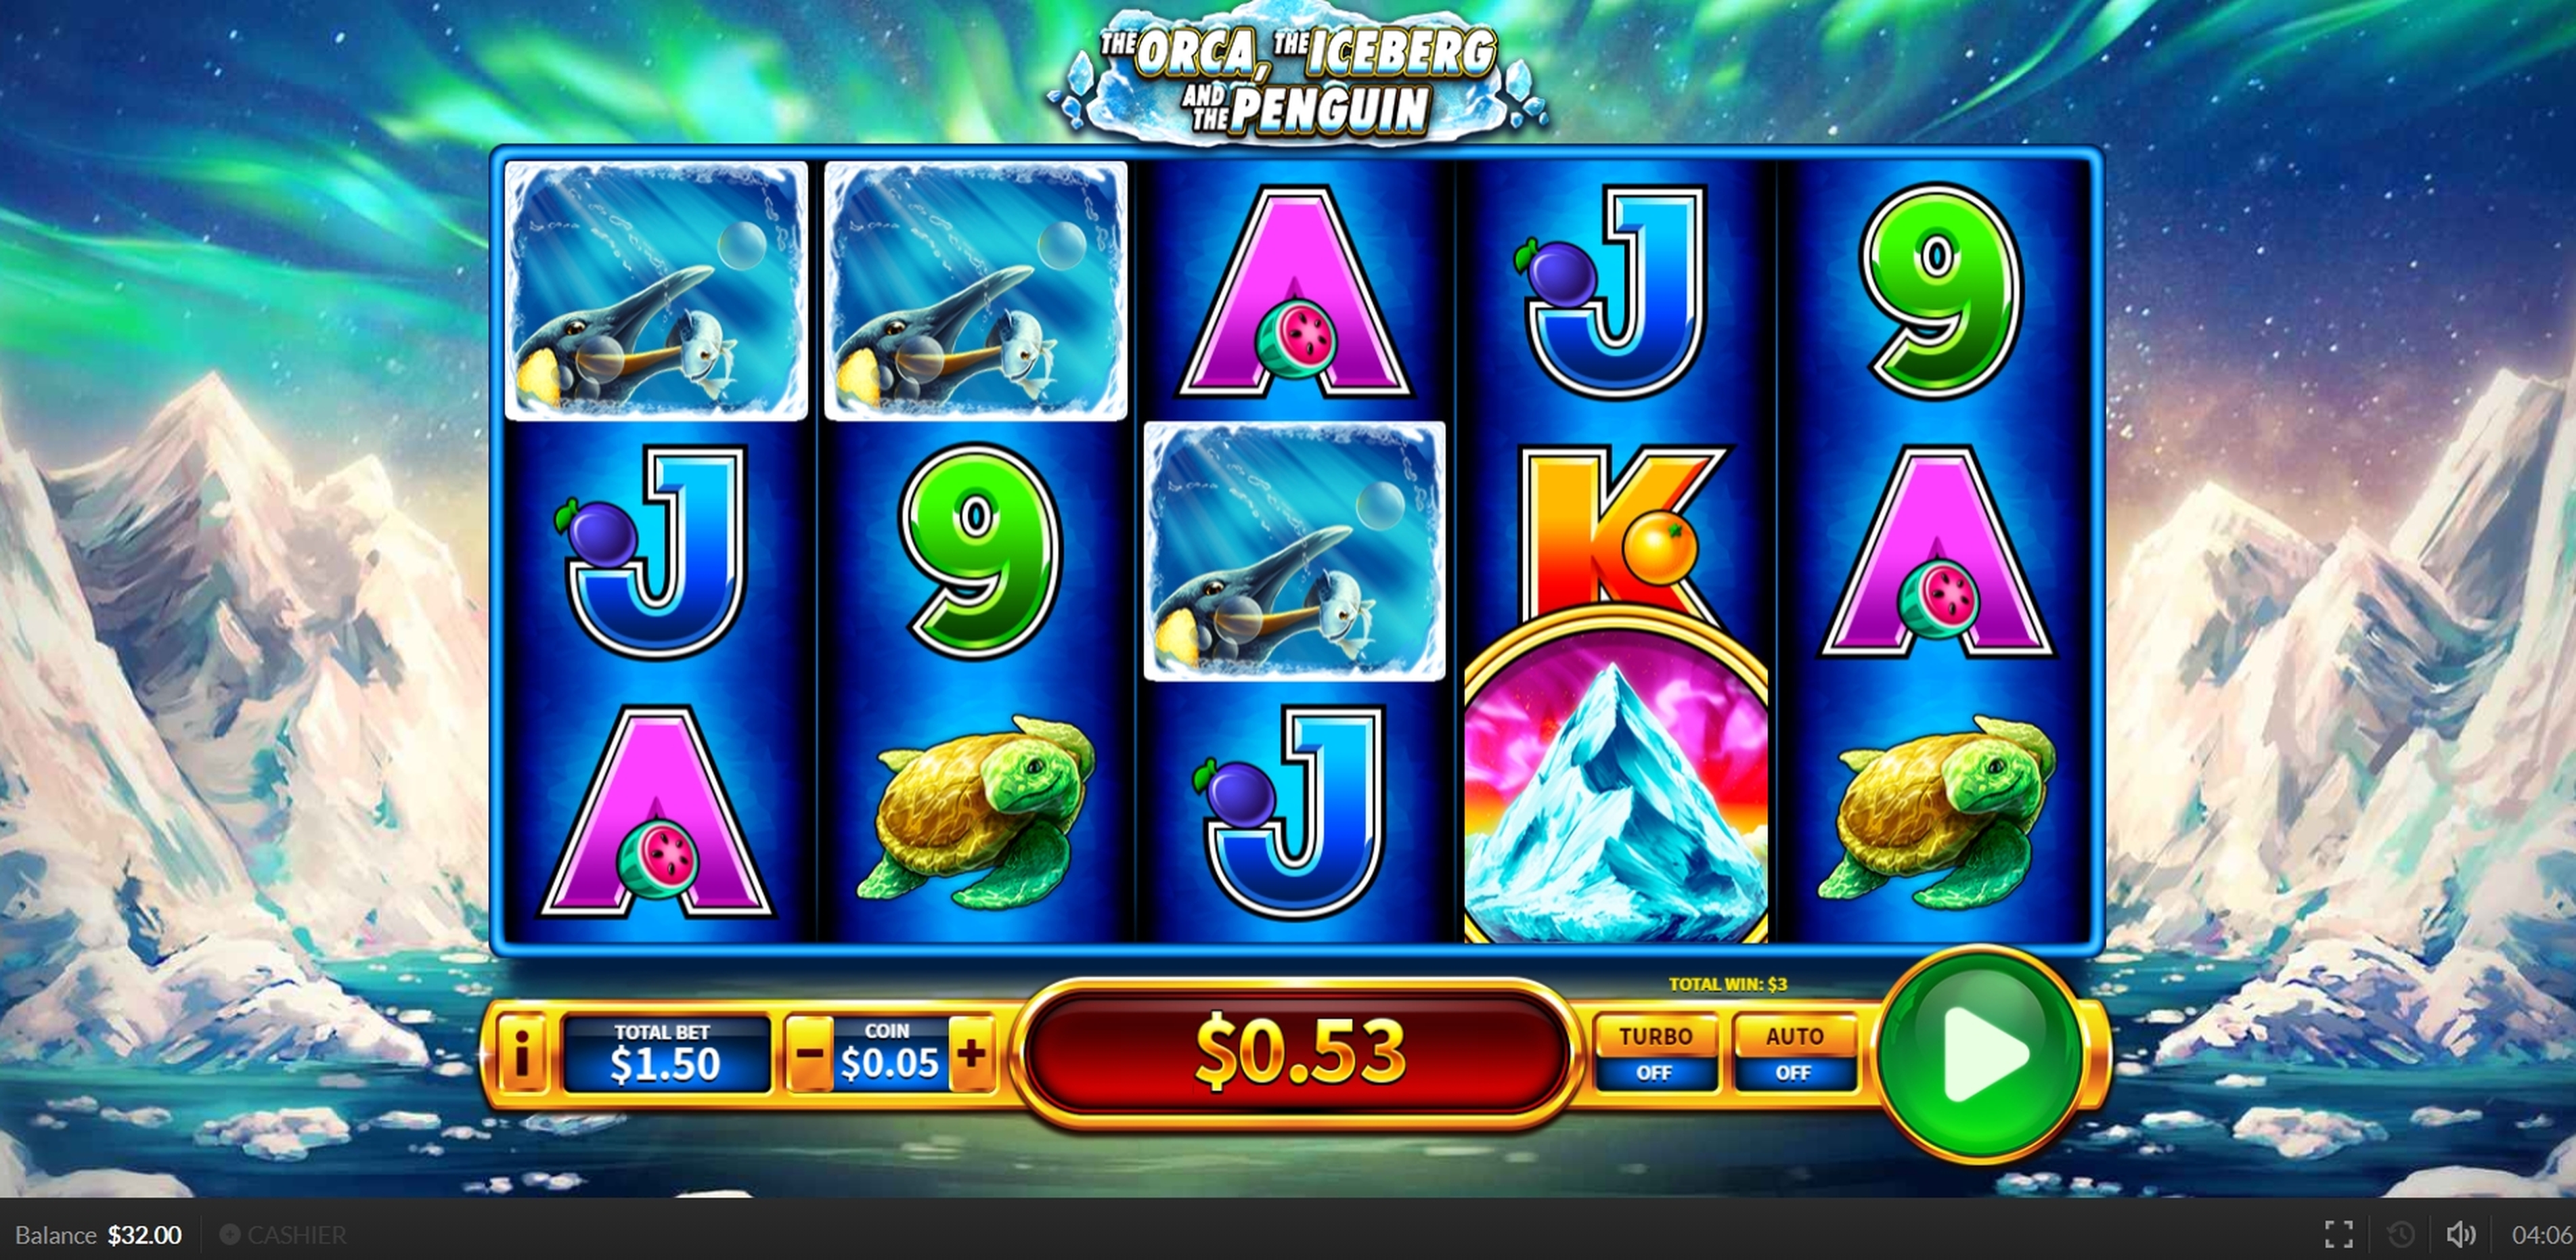 Win Money in The Orca, the Iceberg and the Penguin Free Slot Game by Skywind